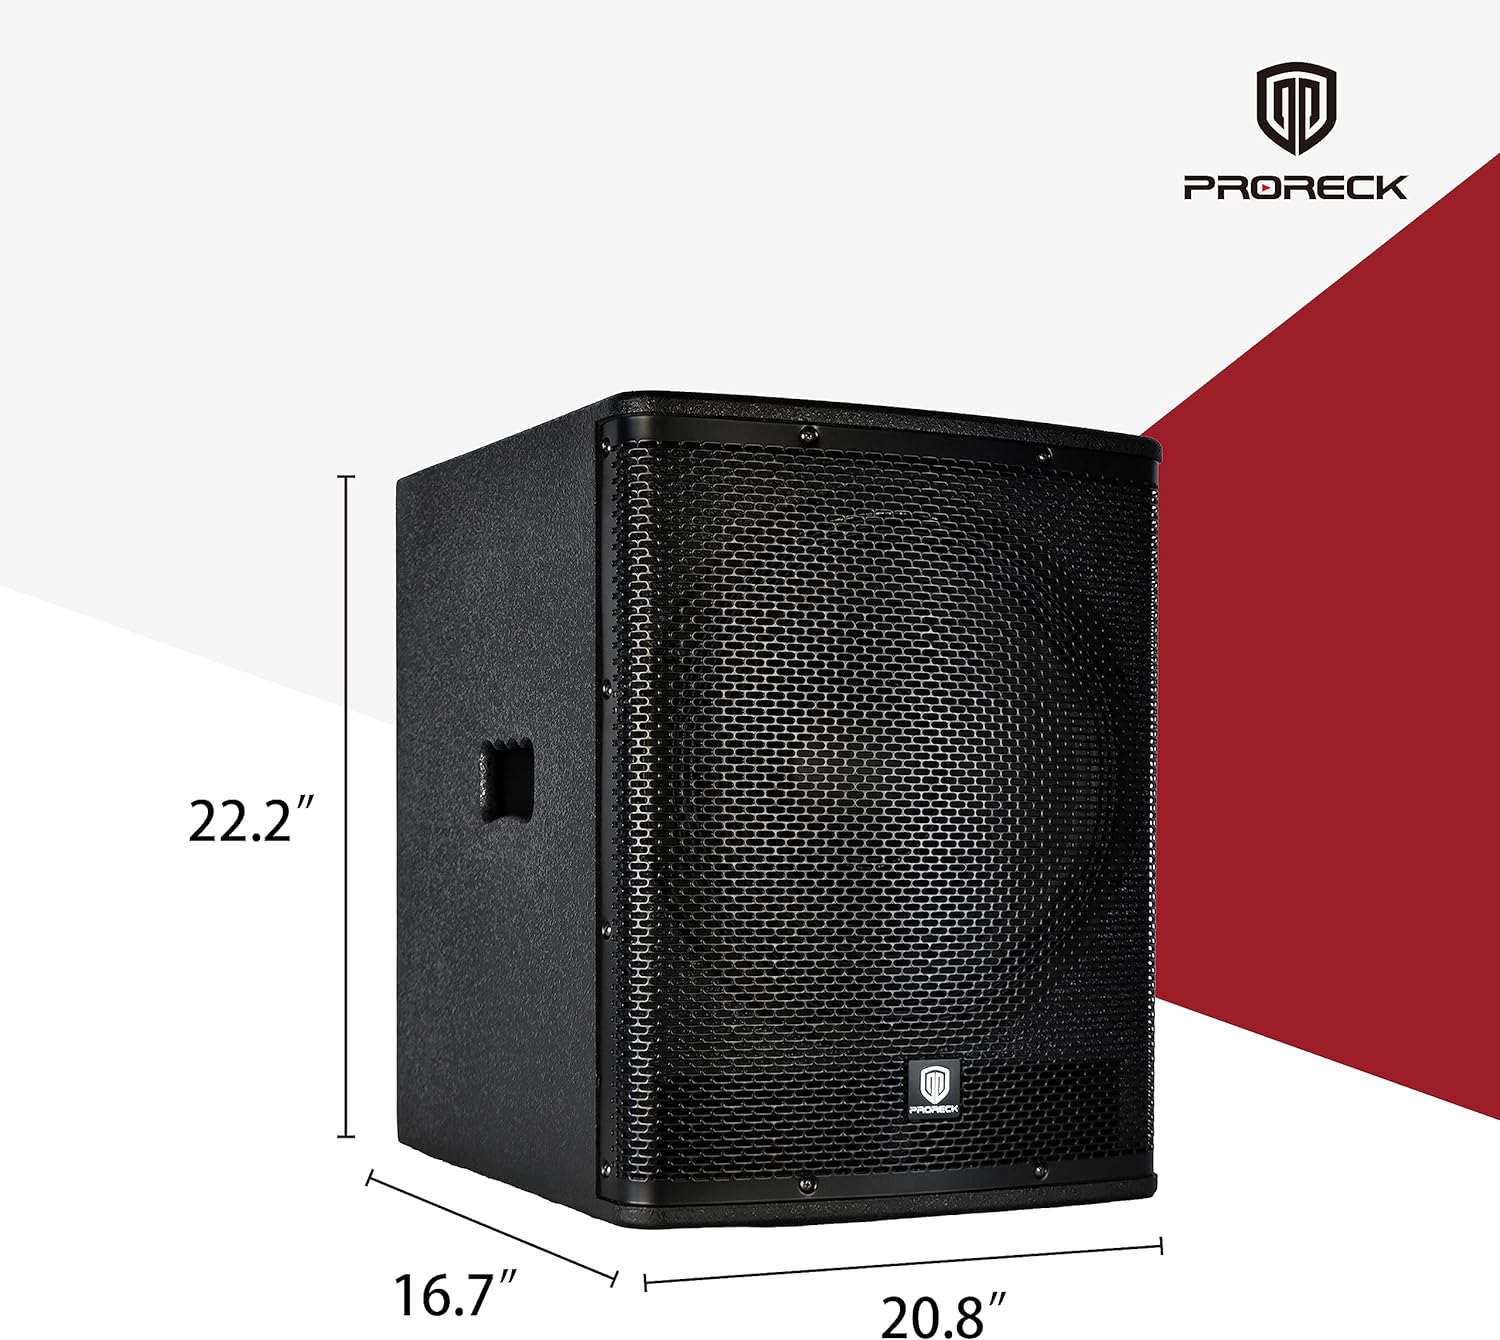 Proreck Sp 15x 12 Inch 1000w Powered Subwoofer